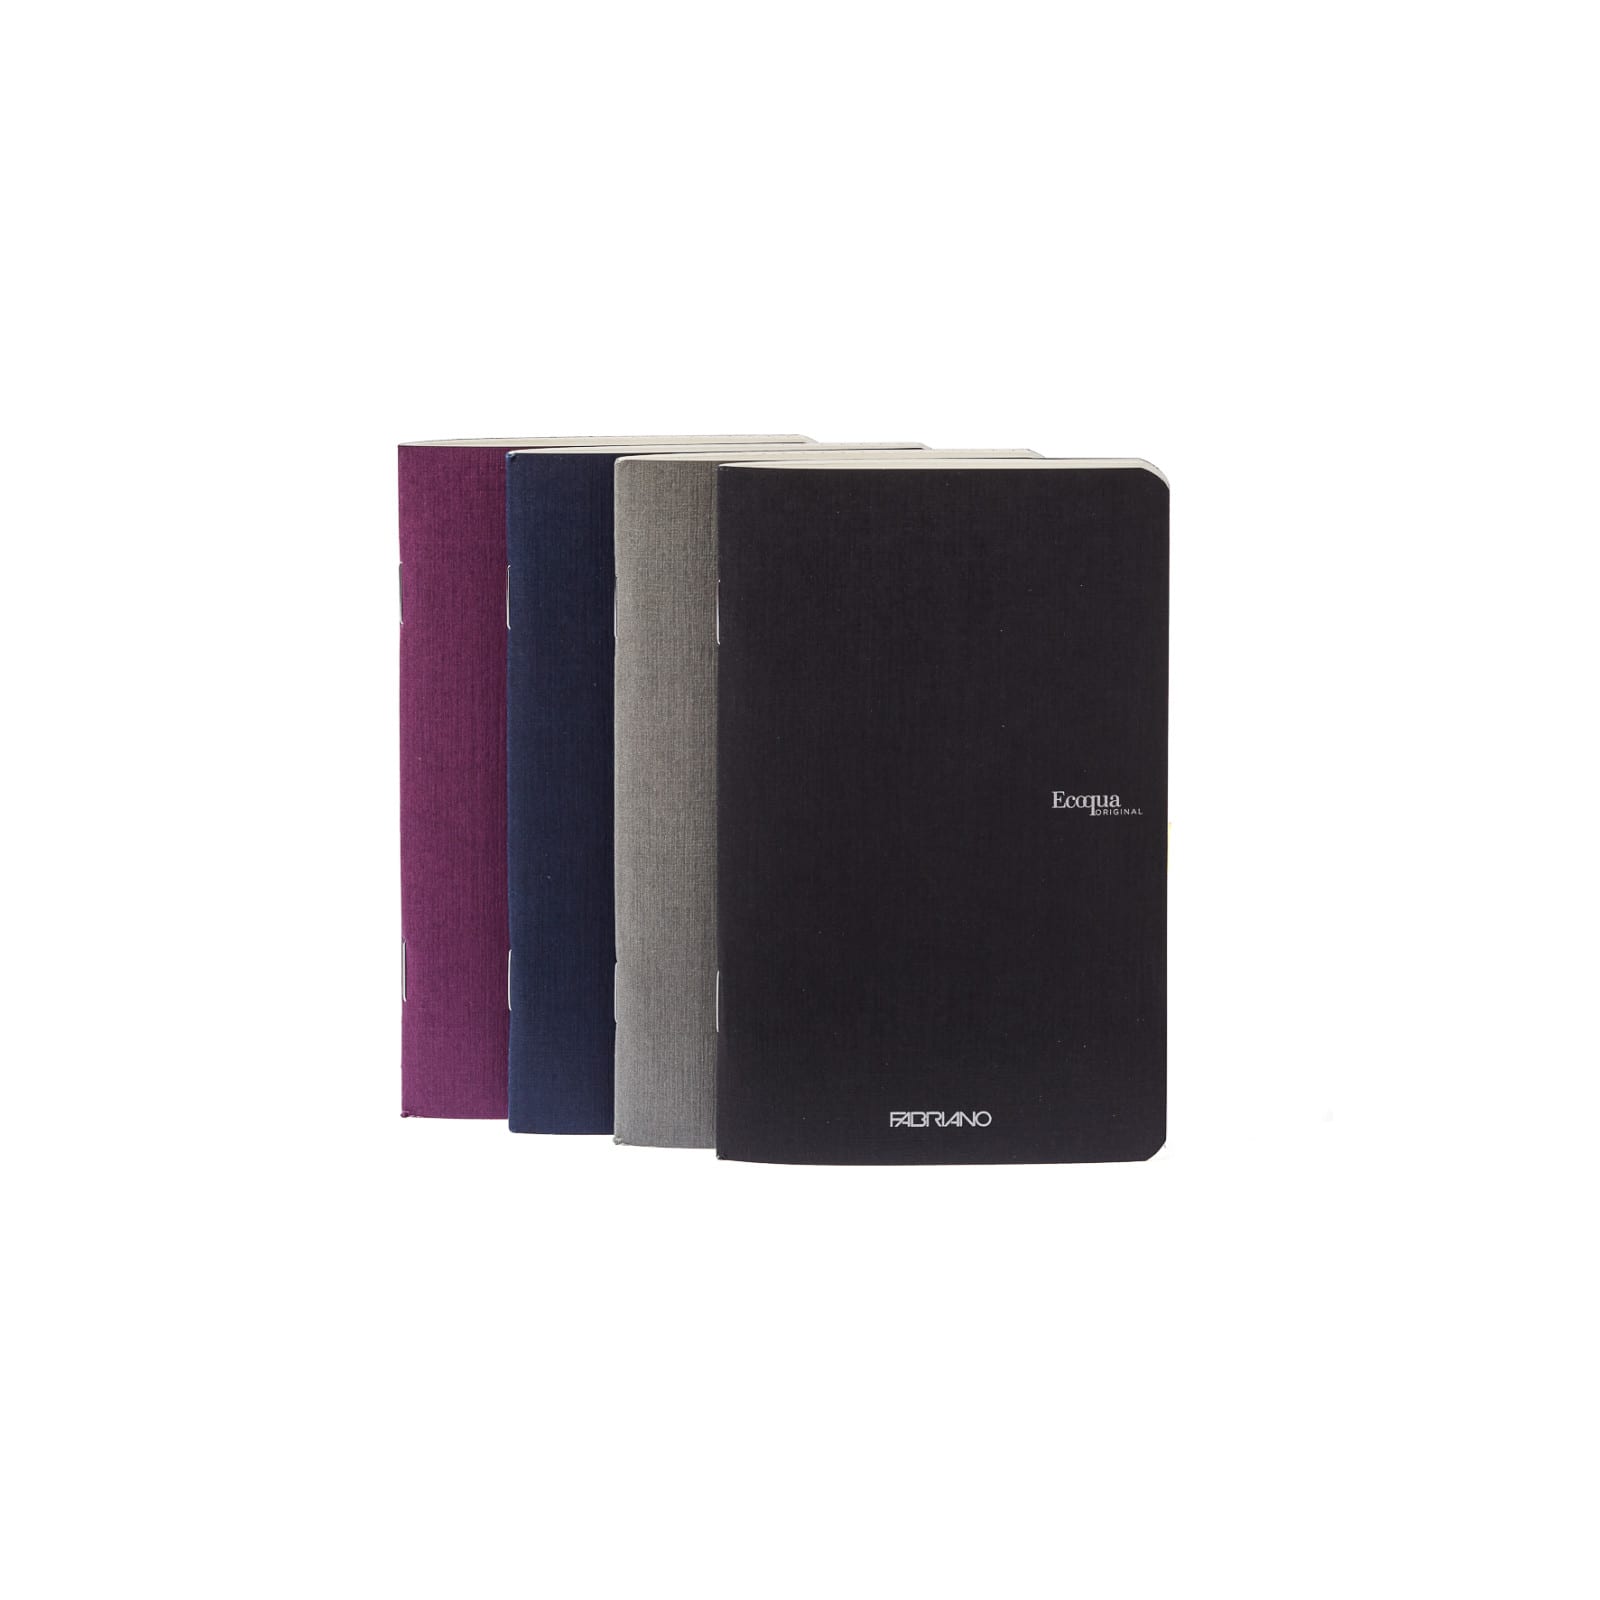 5 Packs: 4 ct. (20 total) Fabriano&#xAE; EcoQua Winter Colors Pocket-Sized Dot Notebooks